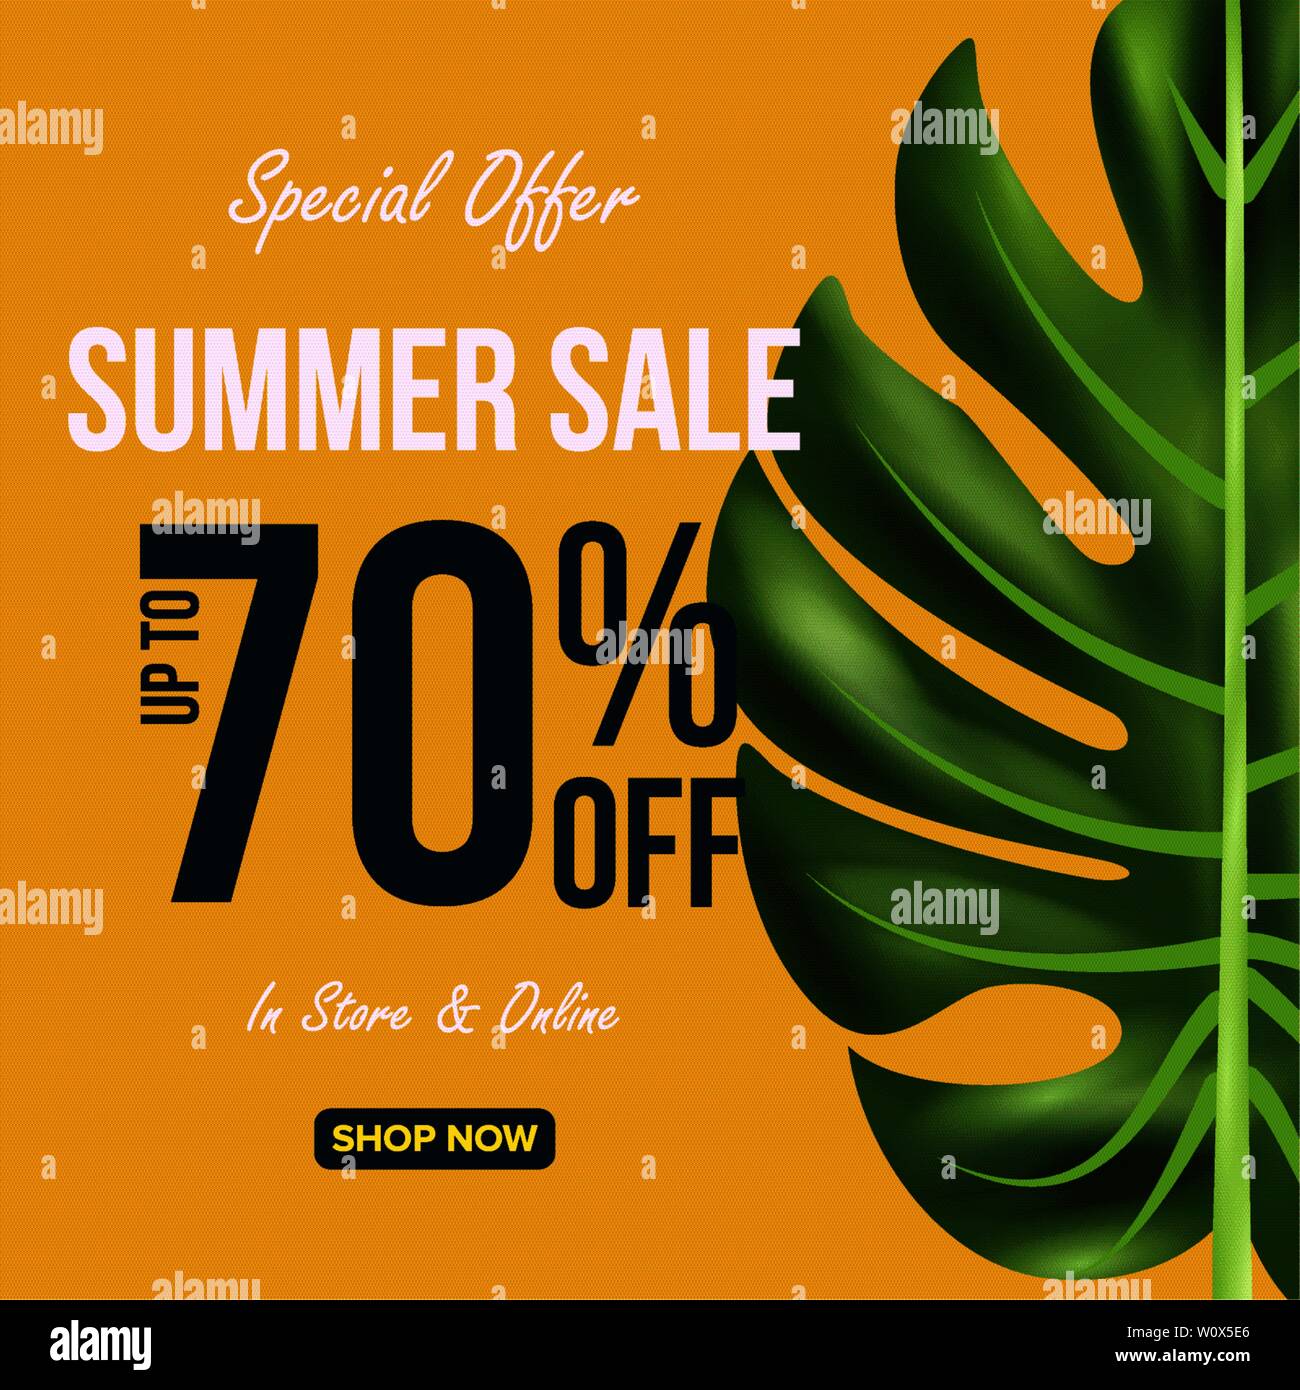 Summer sale banner template, Promo design template for your seasonal promotion. Tropical leaves background. Stock Vector